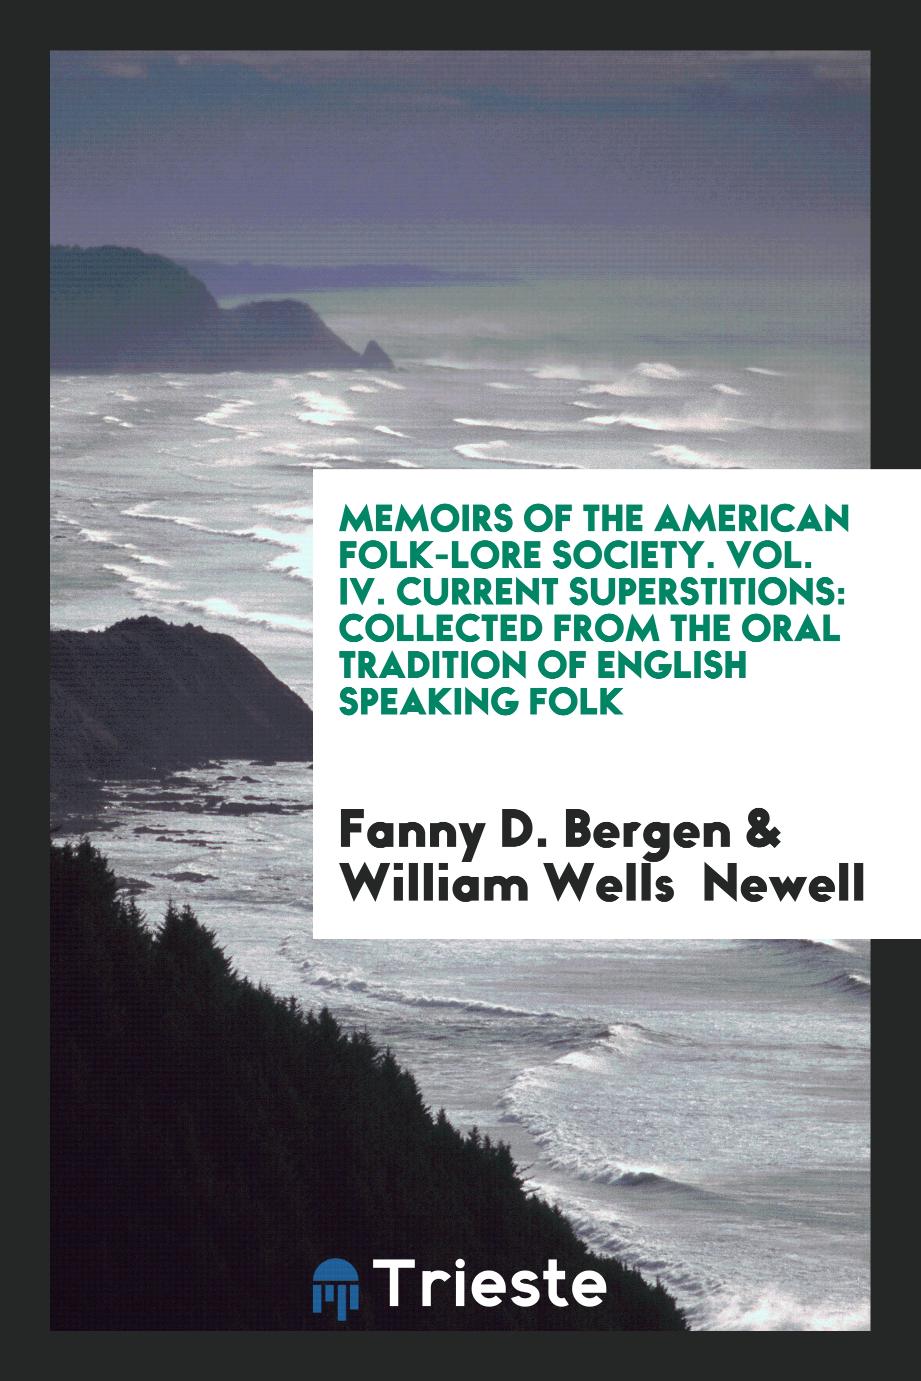 Memoirs of the American Folk-Lore Society. Vol. IV. Current Superstitions: Collected from the Oral Tradition of English Speaking Folk